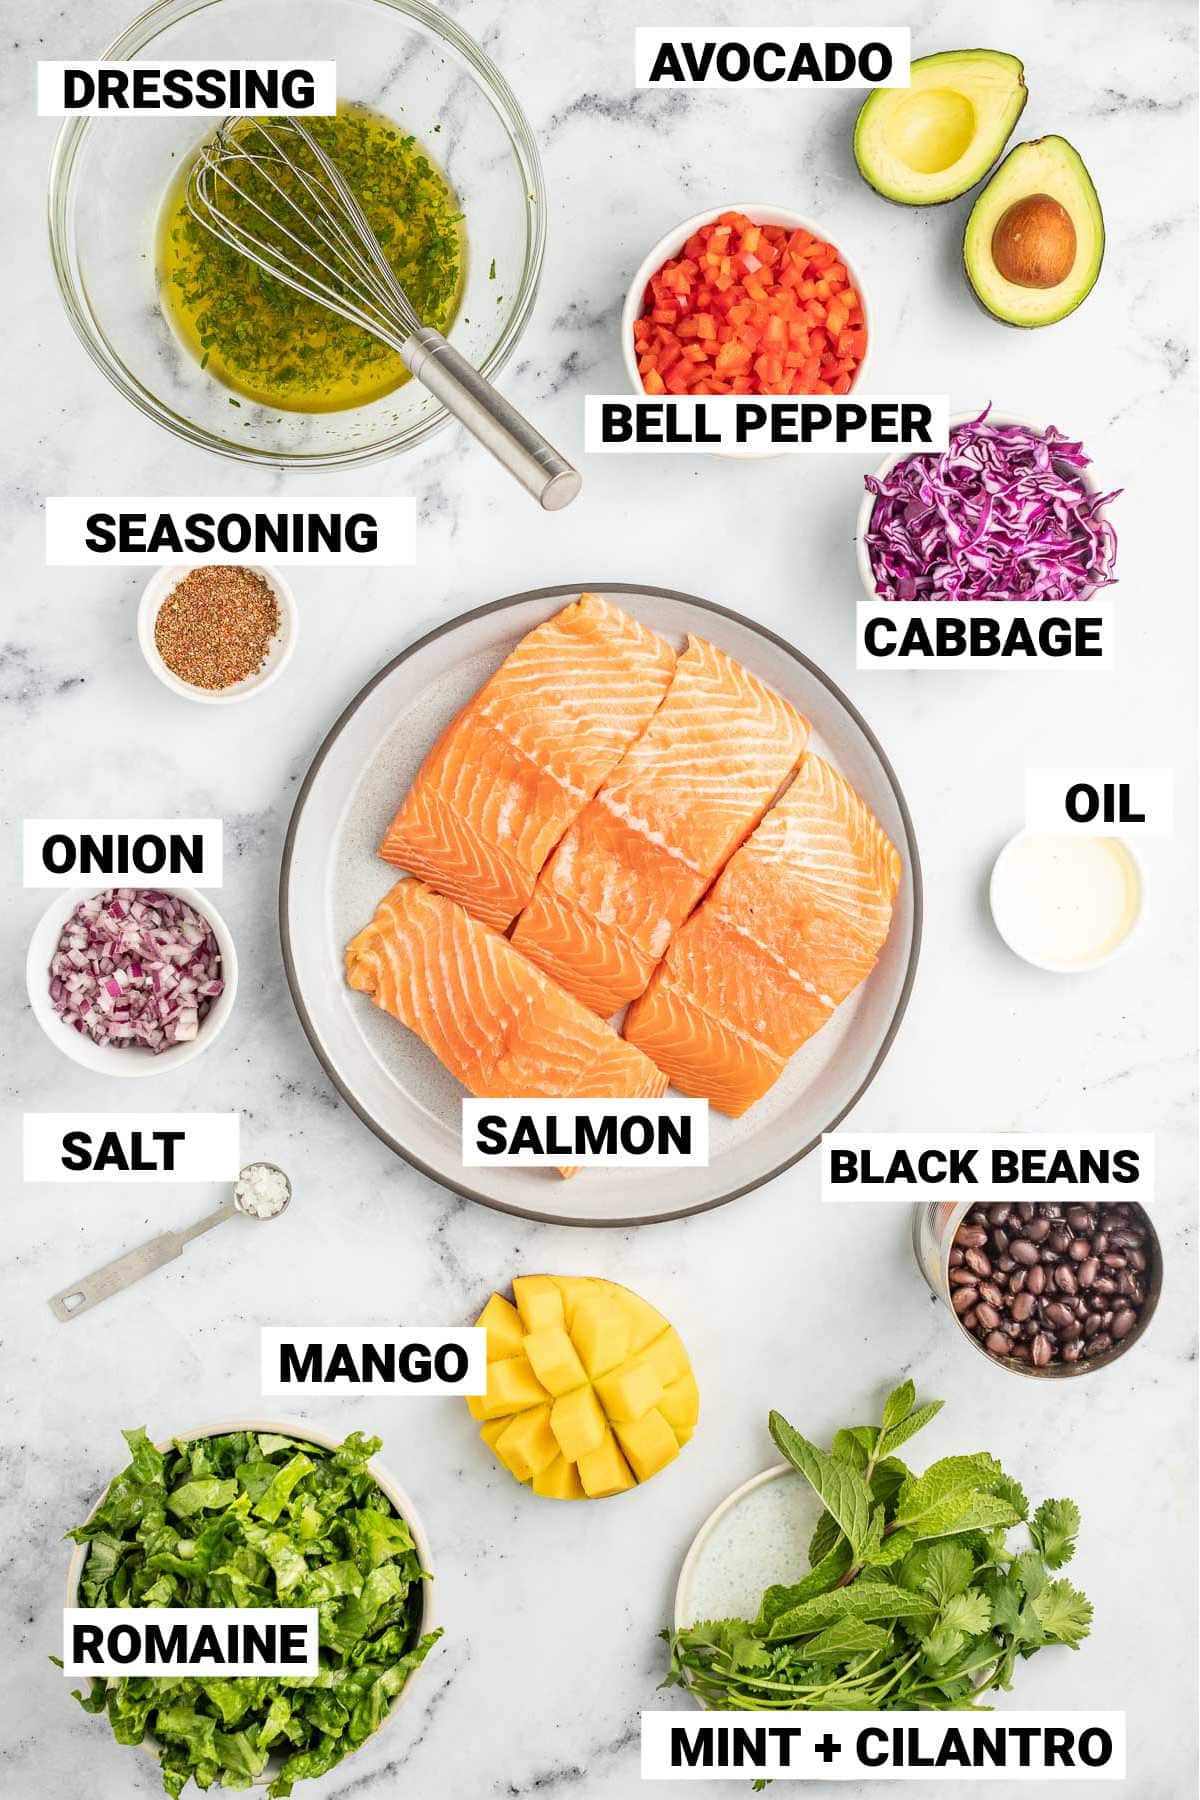 salmon, black beans, oil, cabbage, cajun seasoning, onion, salt, mango, bell pepper, avocado, dressing, romaine, mint, and cilantro all laid out mise en place for the blackened salmon salad recipe